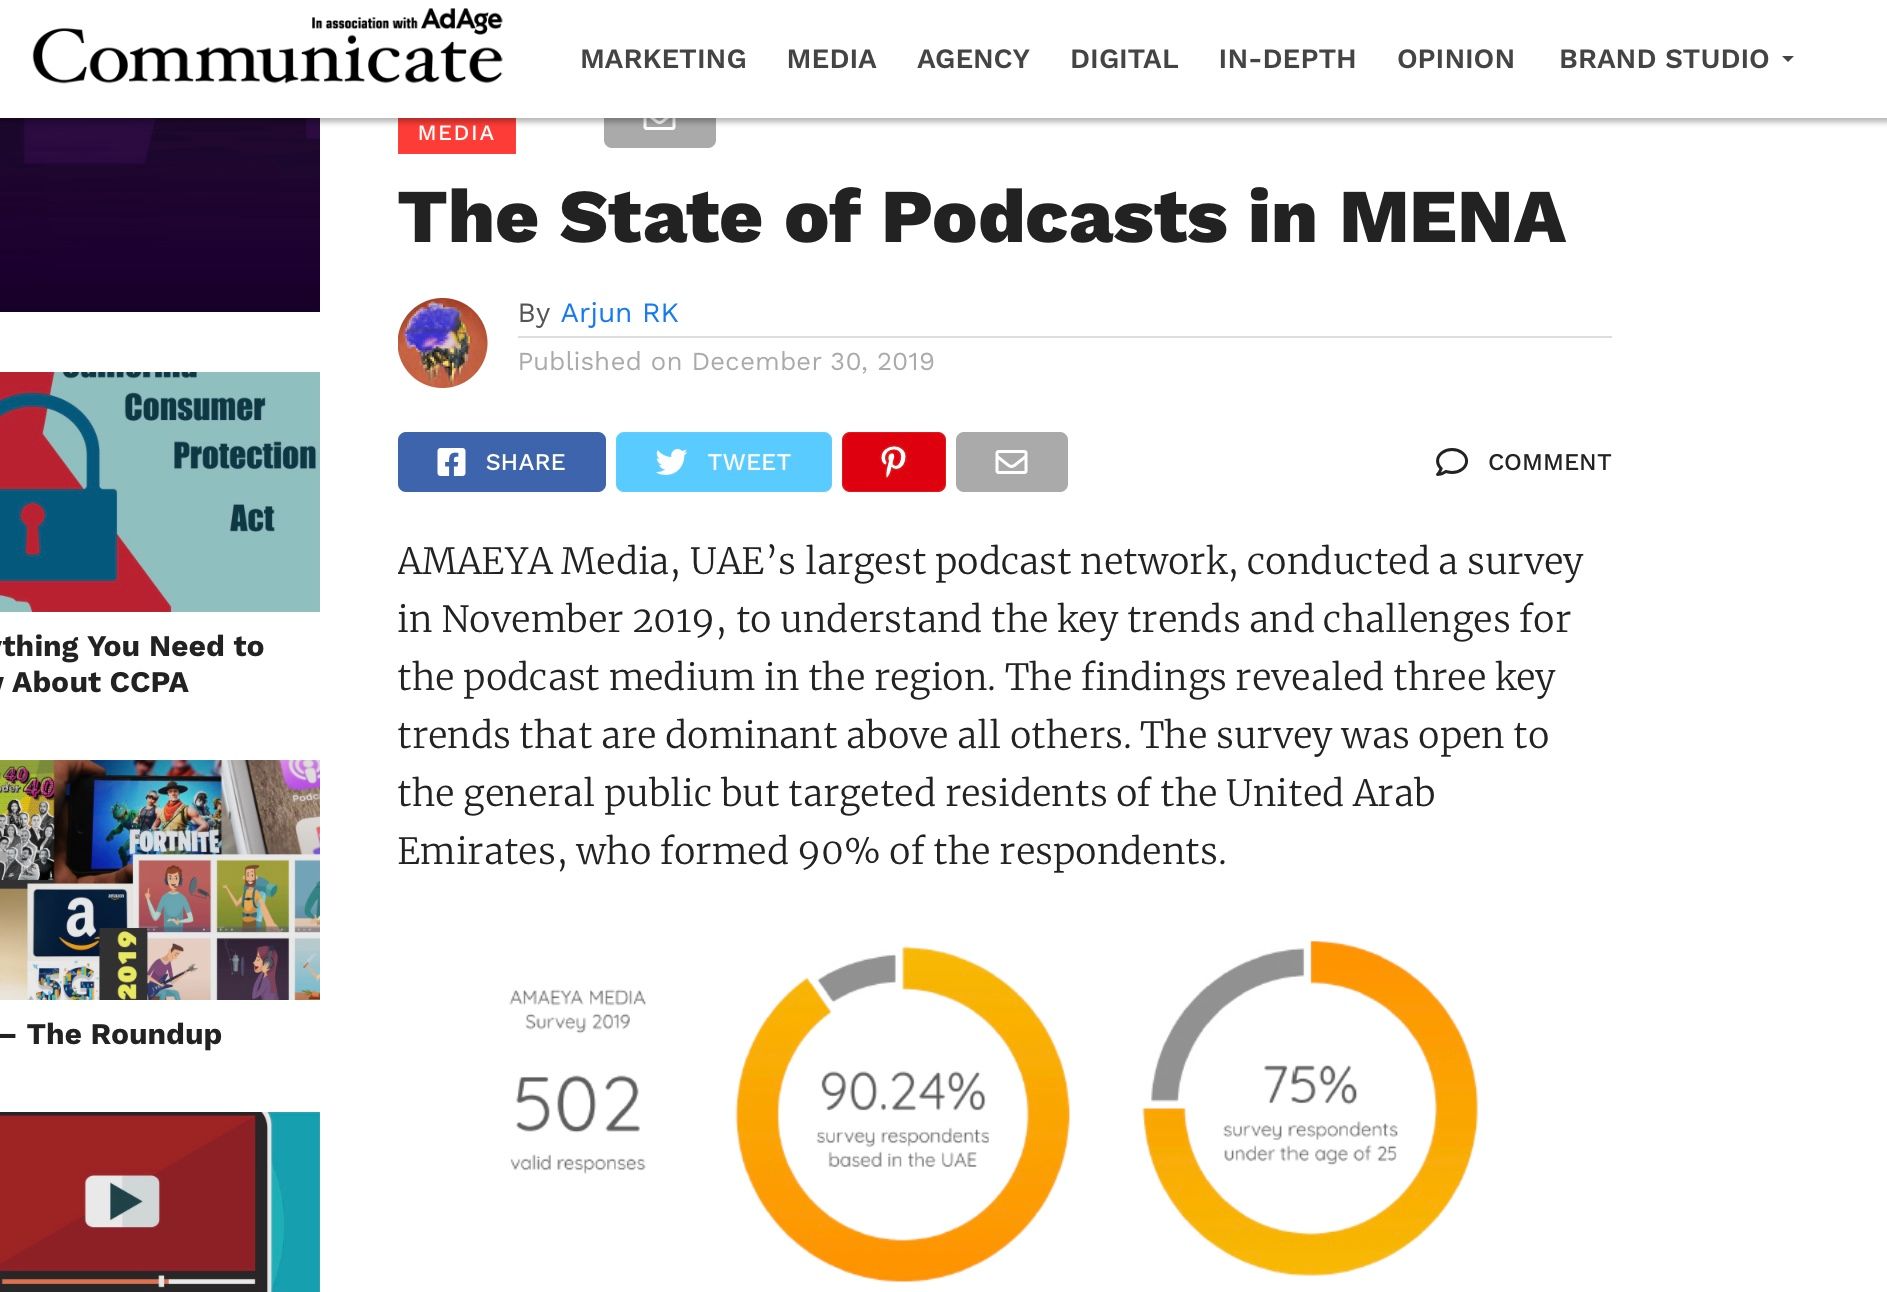 Communicate: The State of Podcasts in MENA